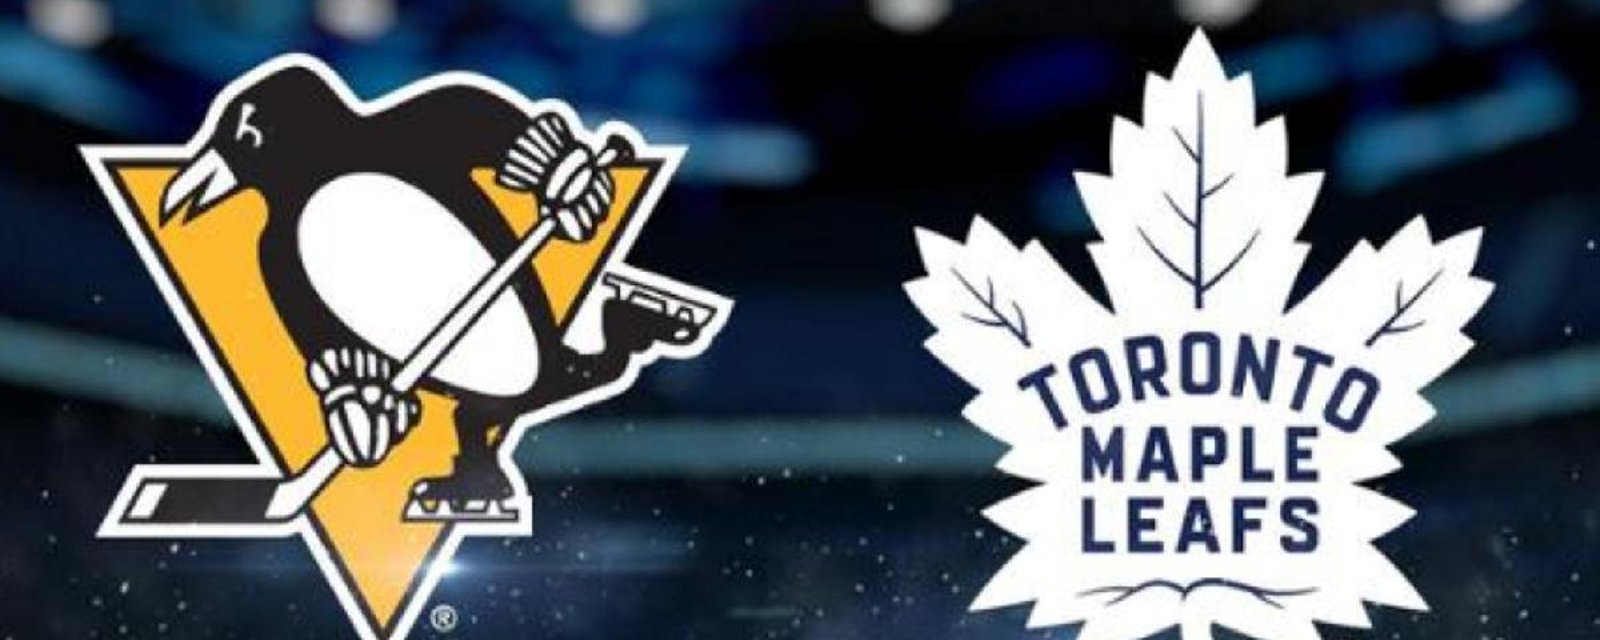 Rumored trade between the Leafs and Pens “would be a perfect fit.”